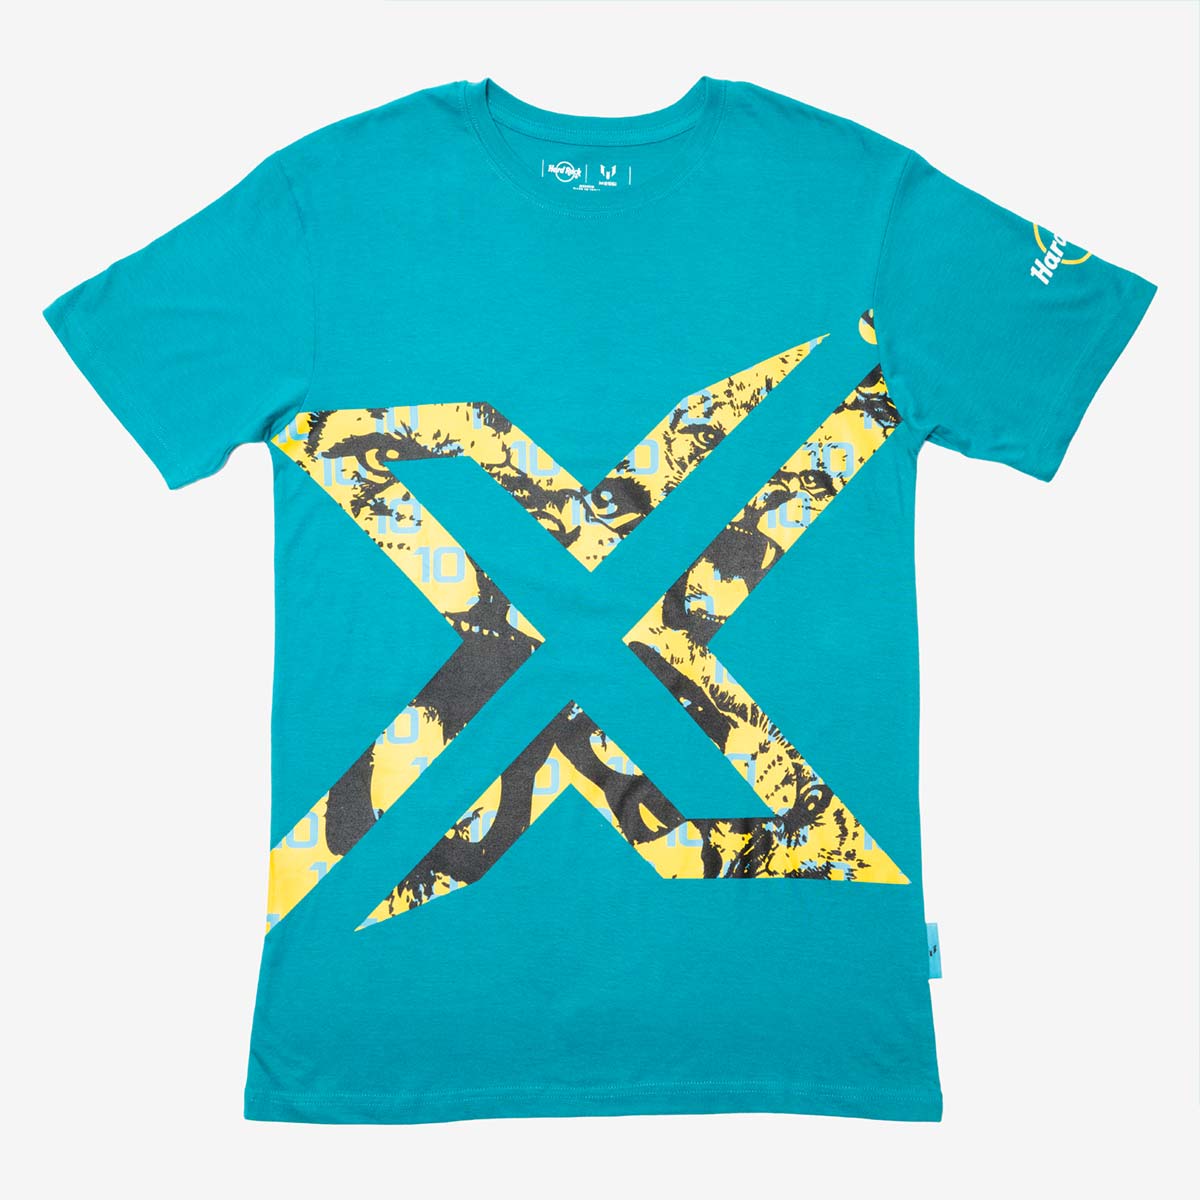 Messi x Hard Rock Adult Fit Crew Tee in Teal image number 1